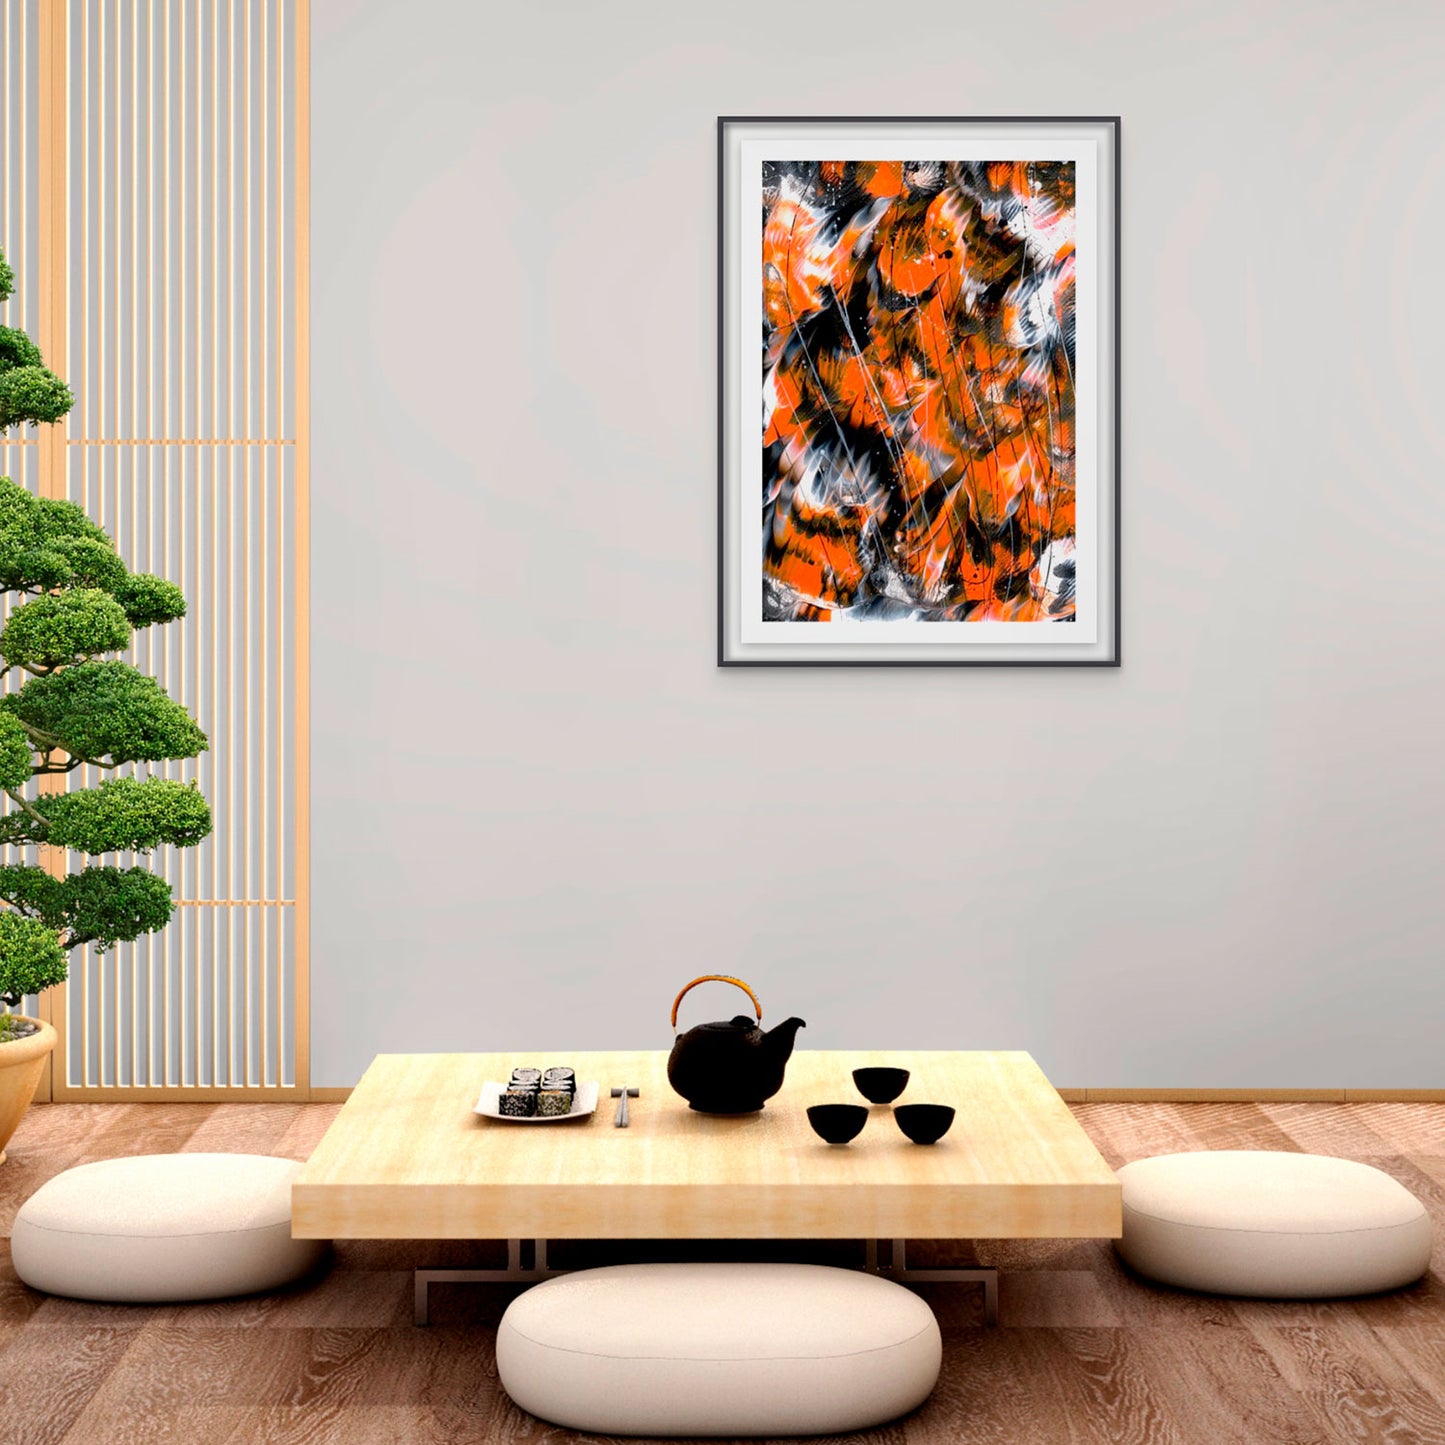 'Monarch 1' Paper print framed in black and seen hanging in room with Japanese style décor.Print is after the original painting by Bridget Bradley, Abstratc Expressionist Artist.